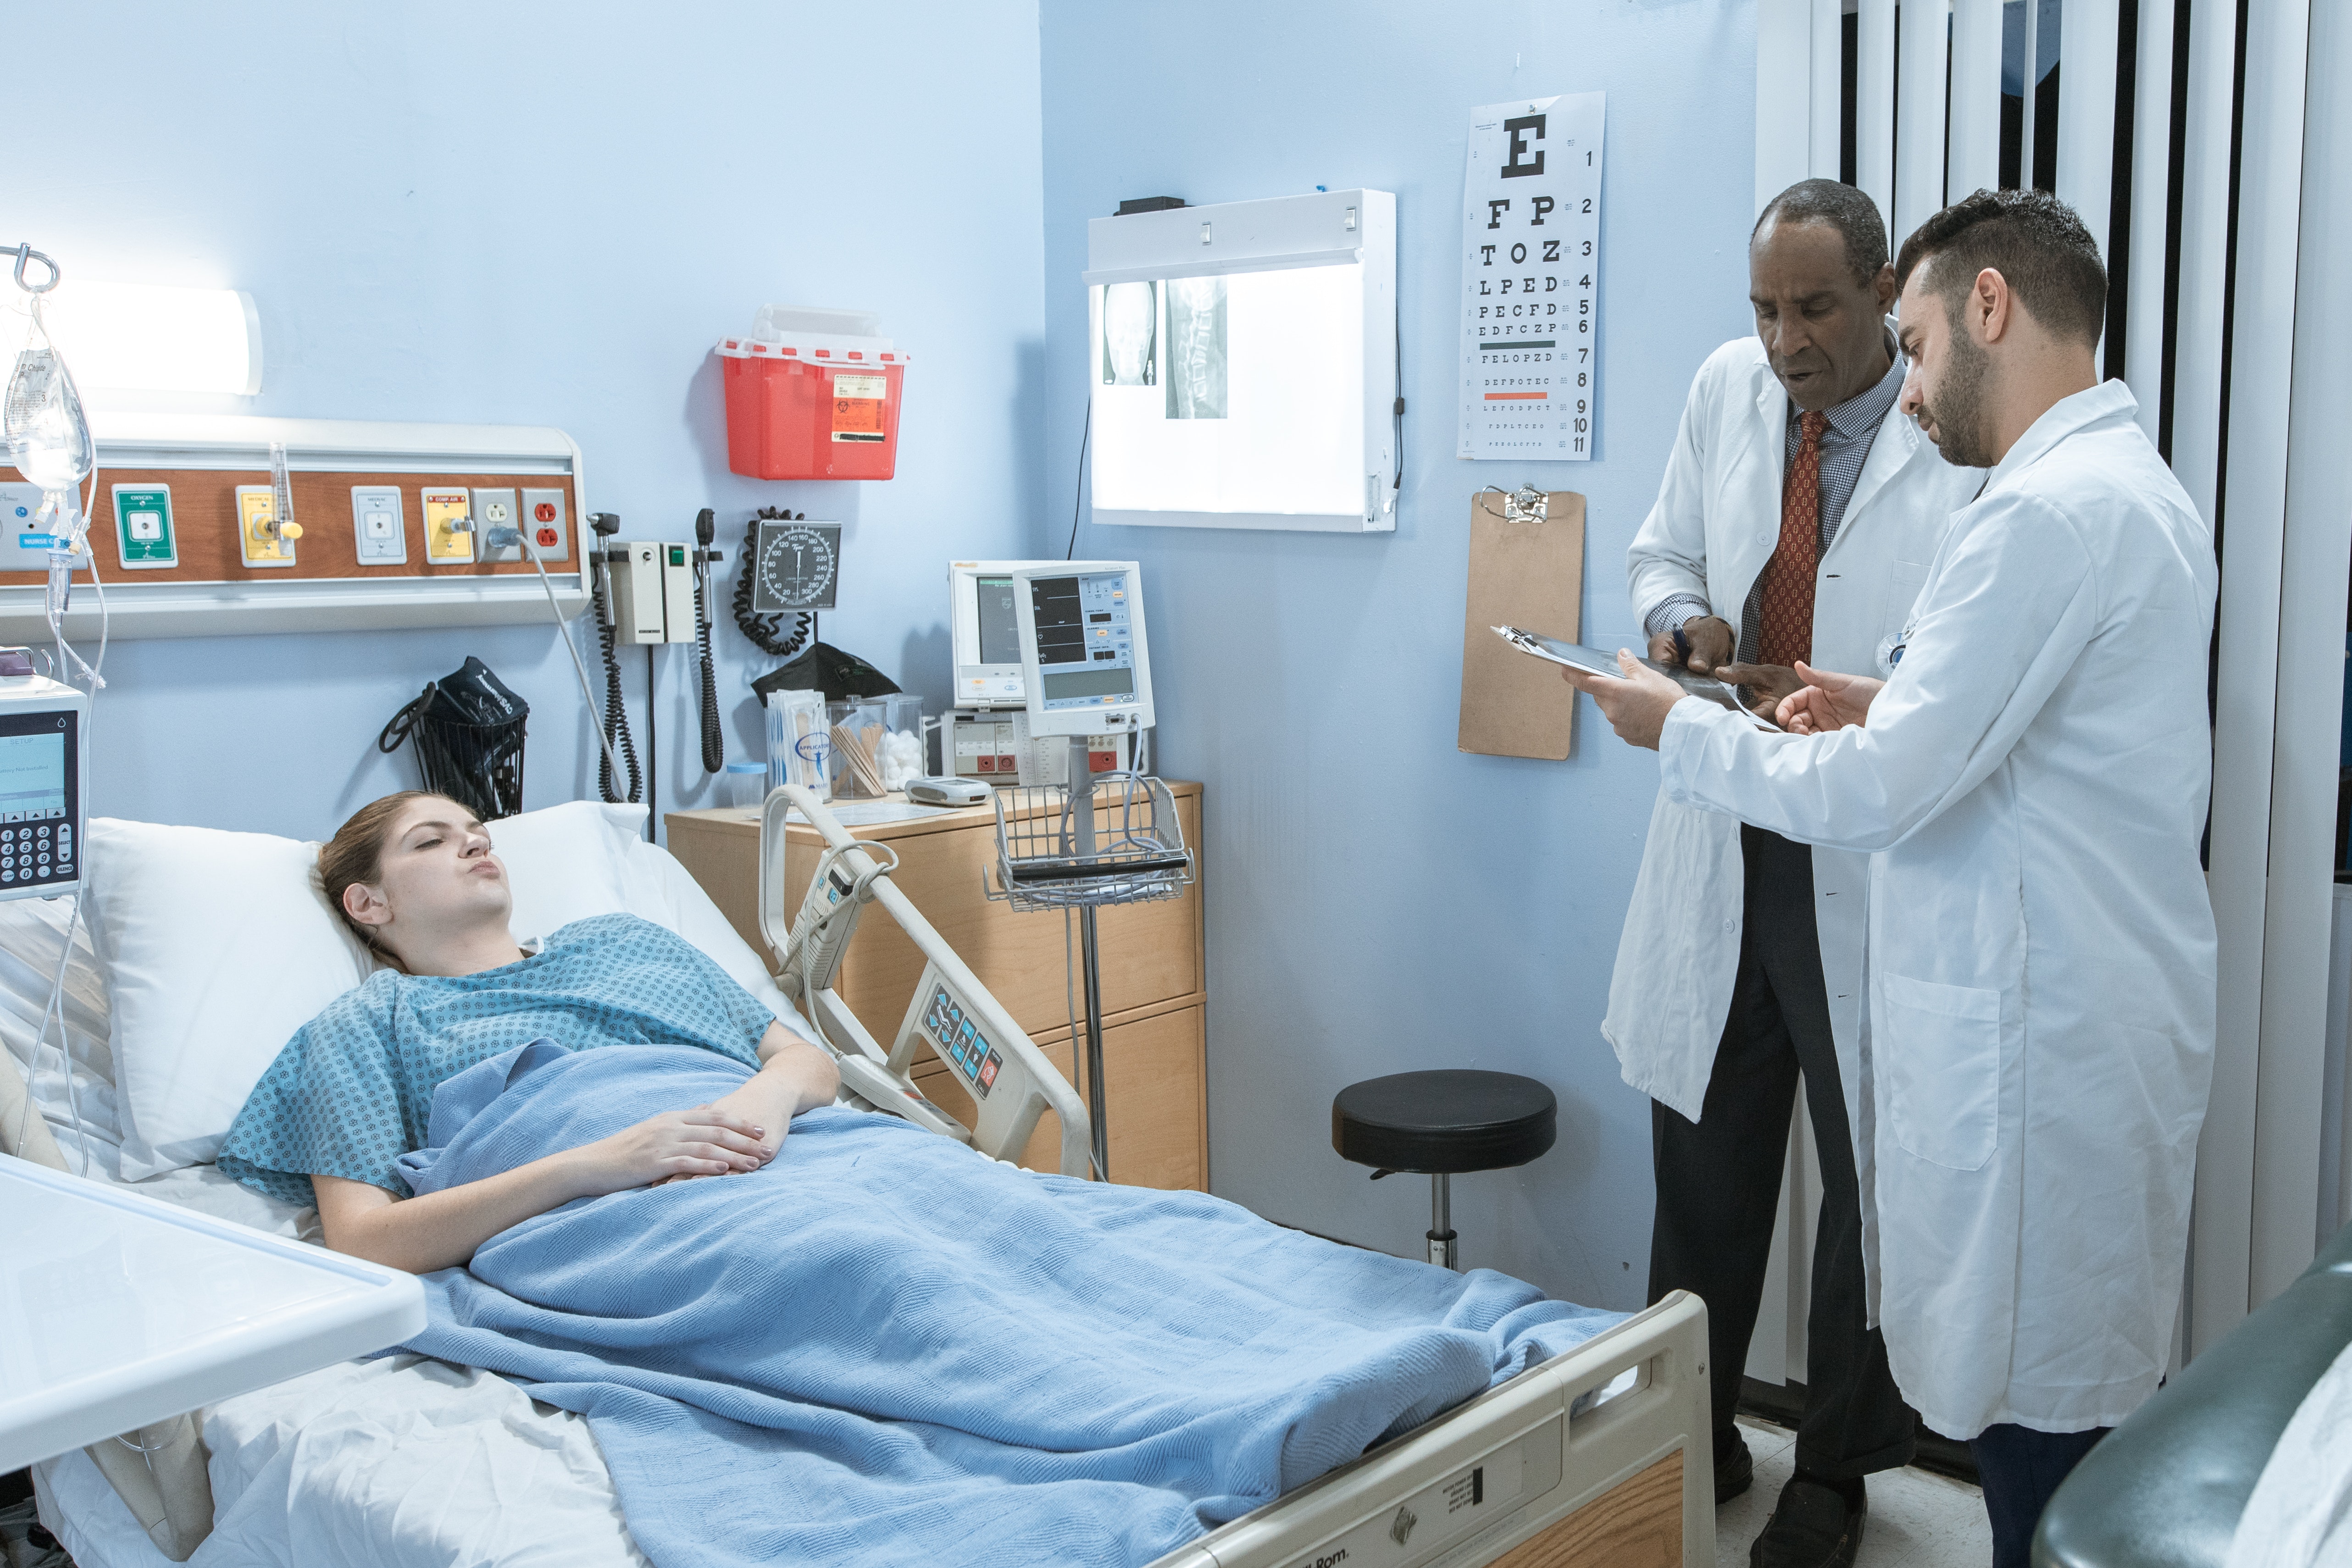 How Bedside Shift Reporting Can Decrease Medical Errors